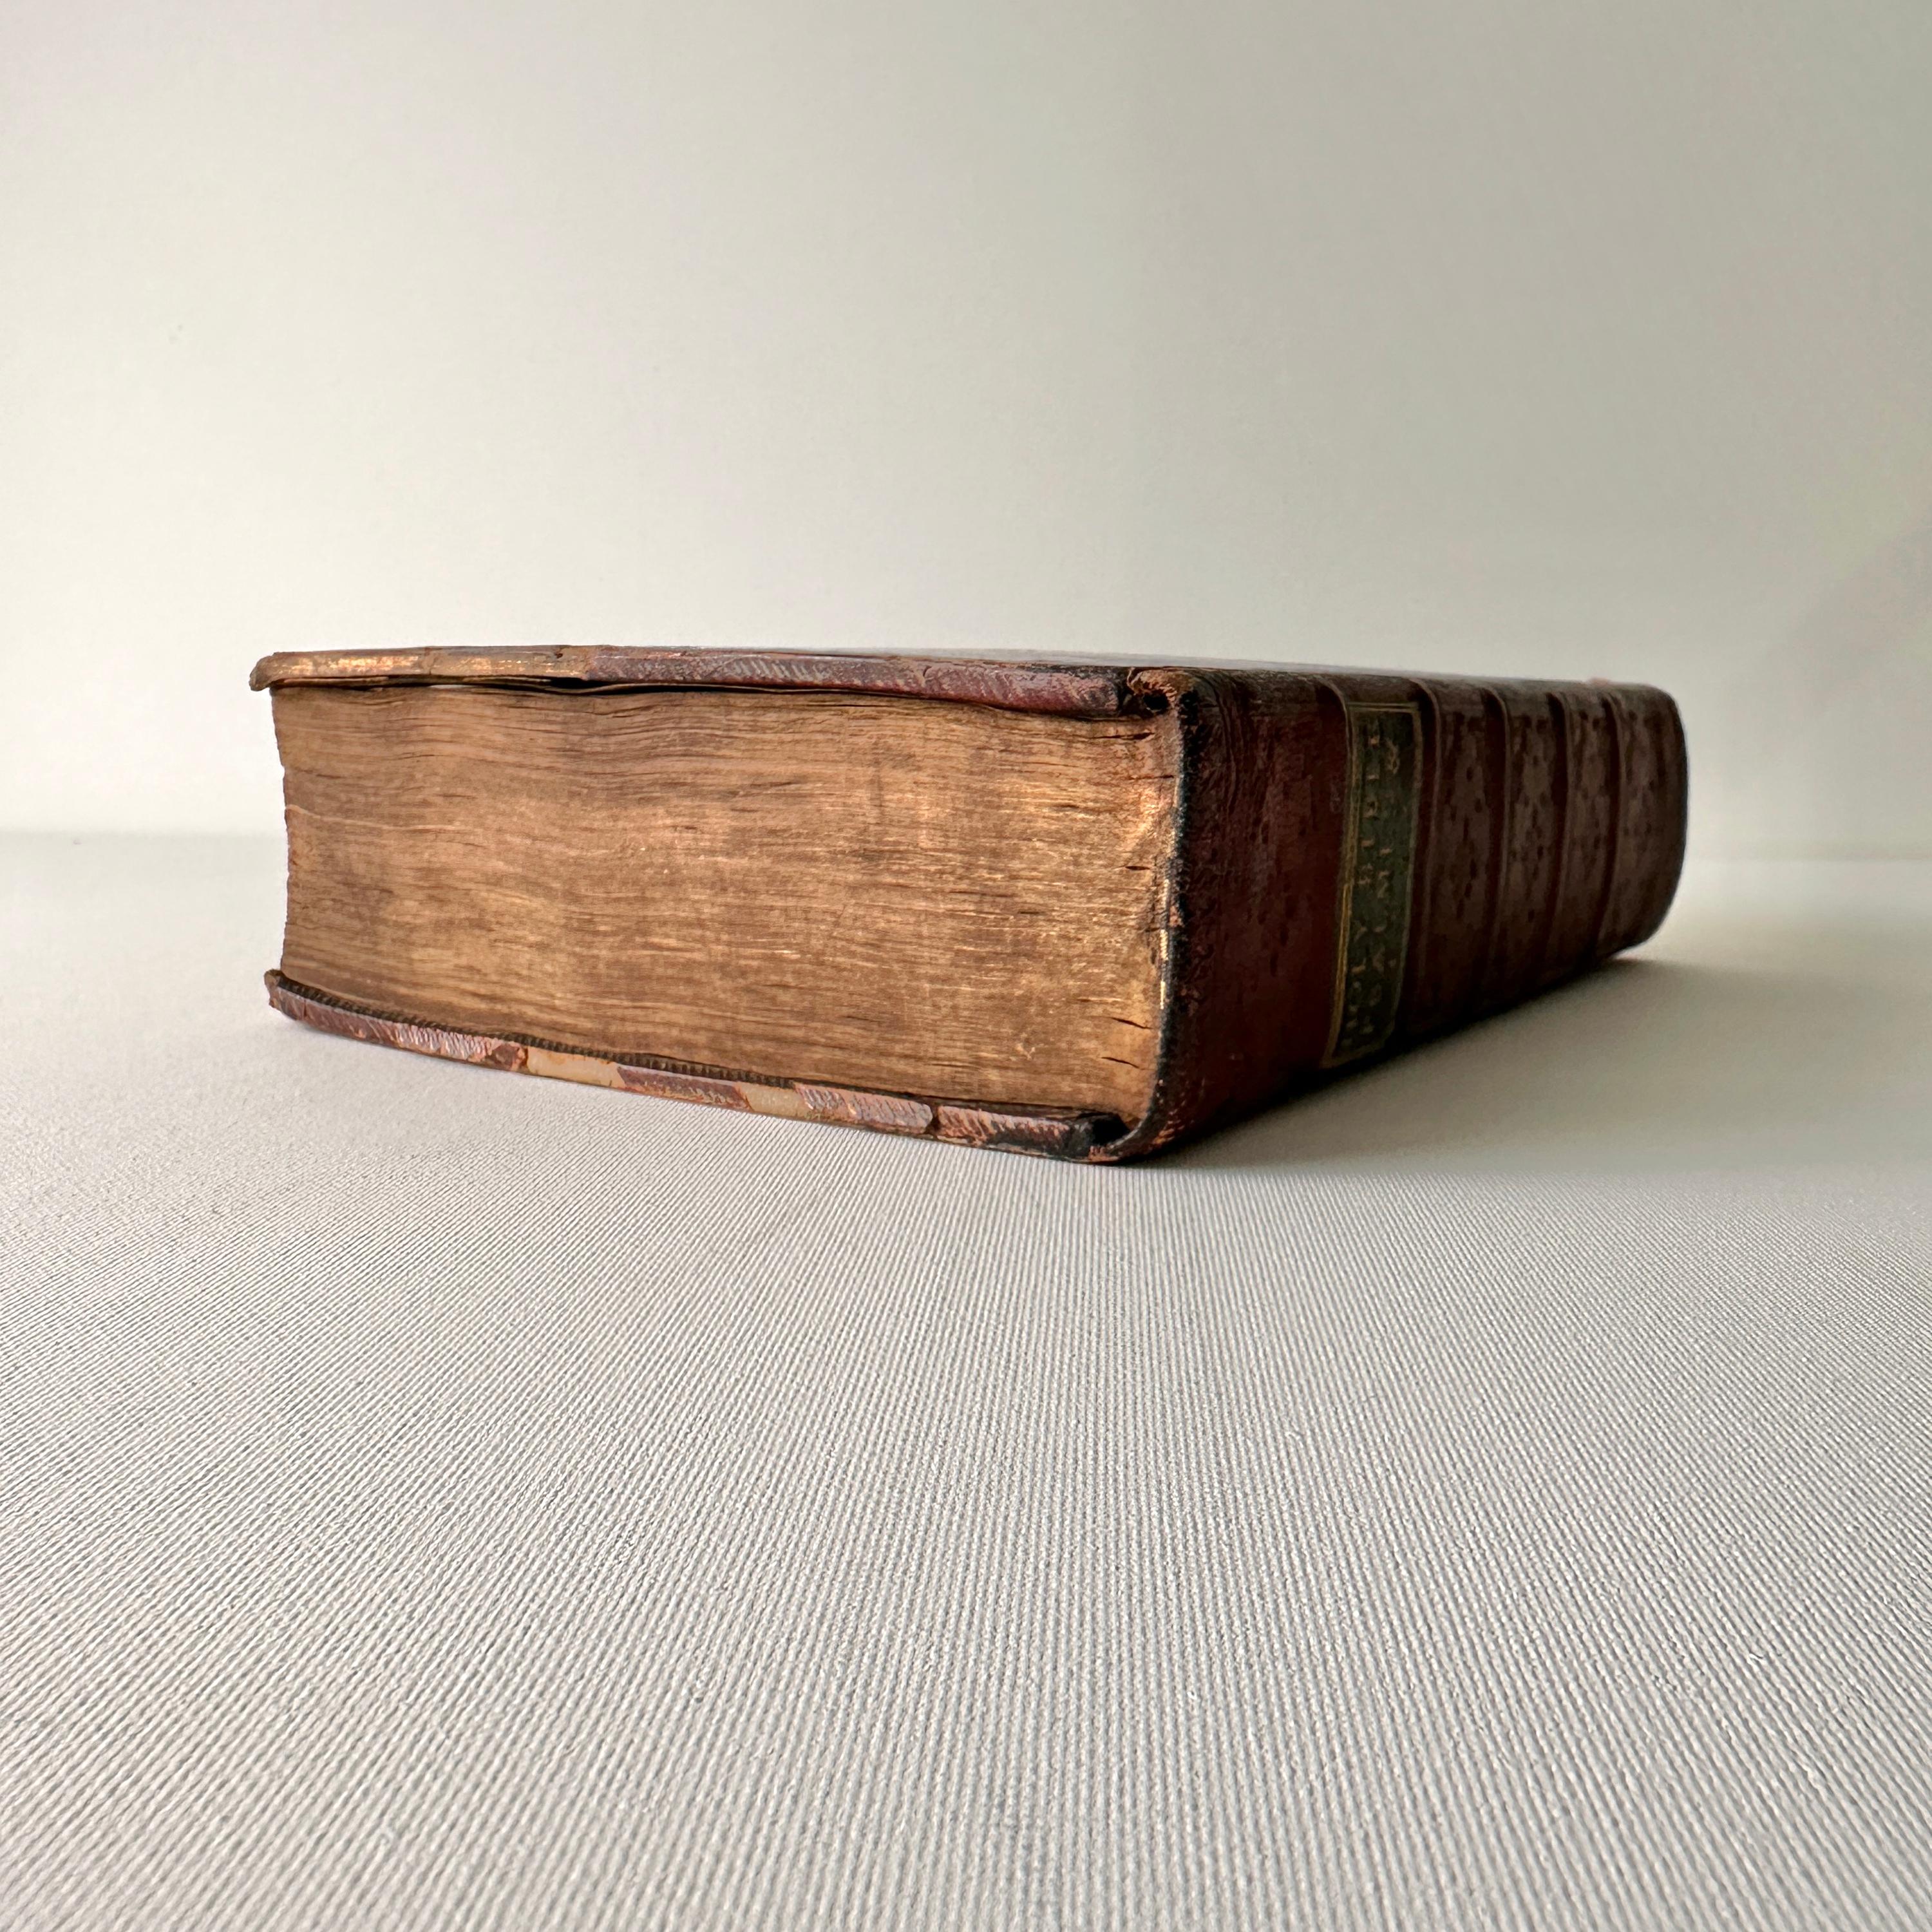 Leather Geneva Bible, Christopher Barker, London, Dated 1599 For Sale